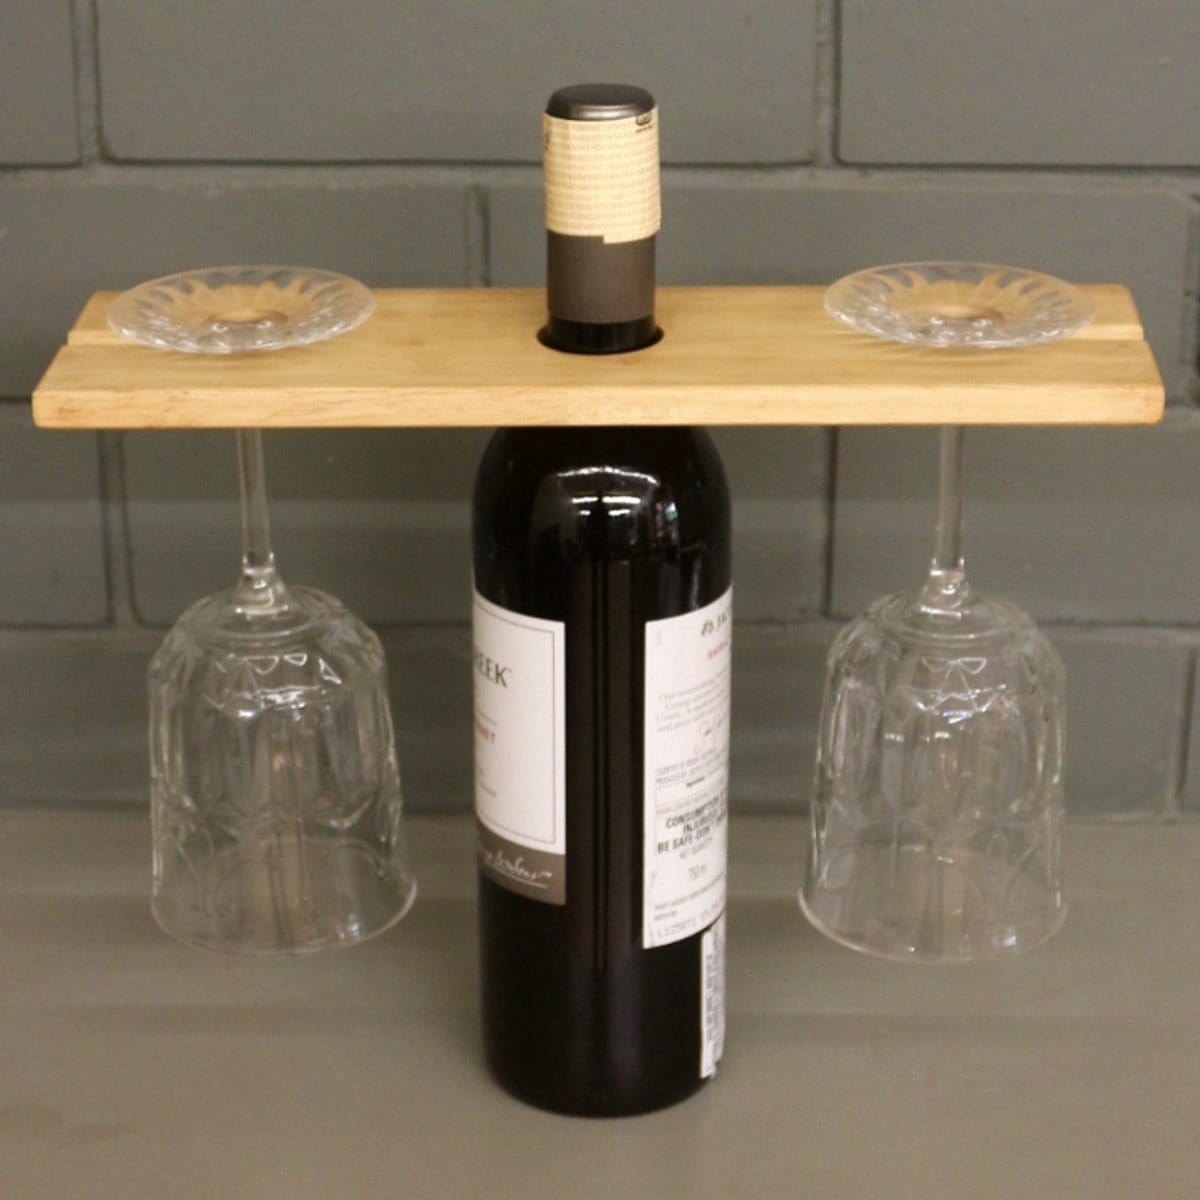 Barish Wine and Glass Holder Best Home Decor Handcrafted